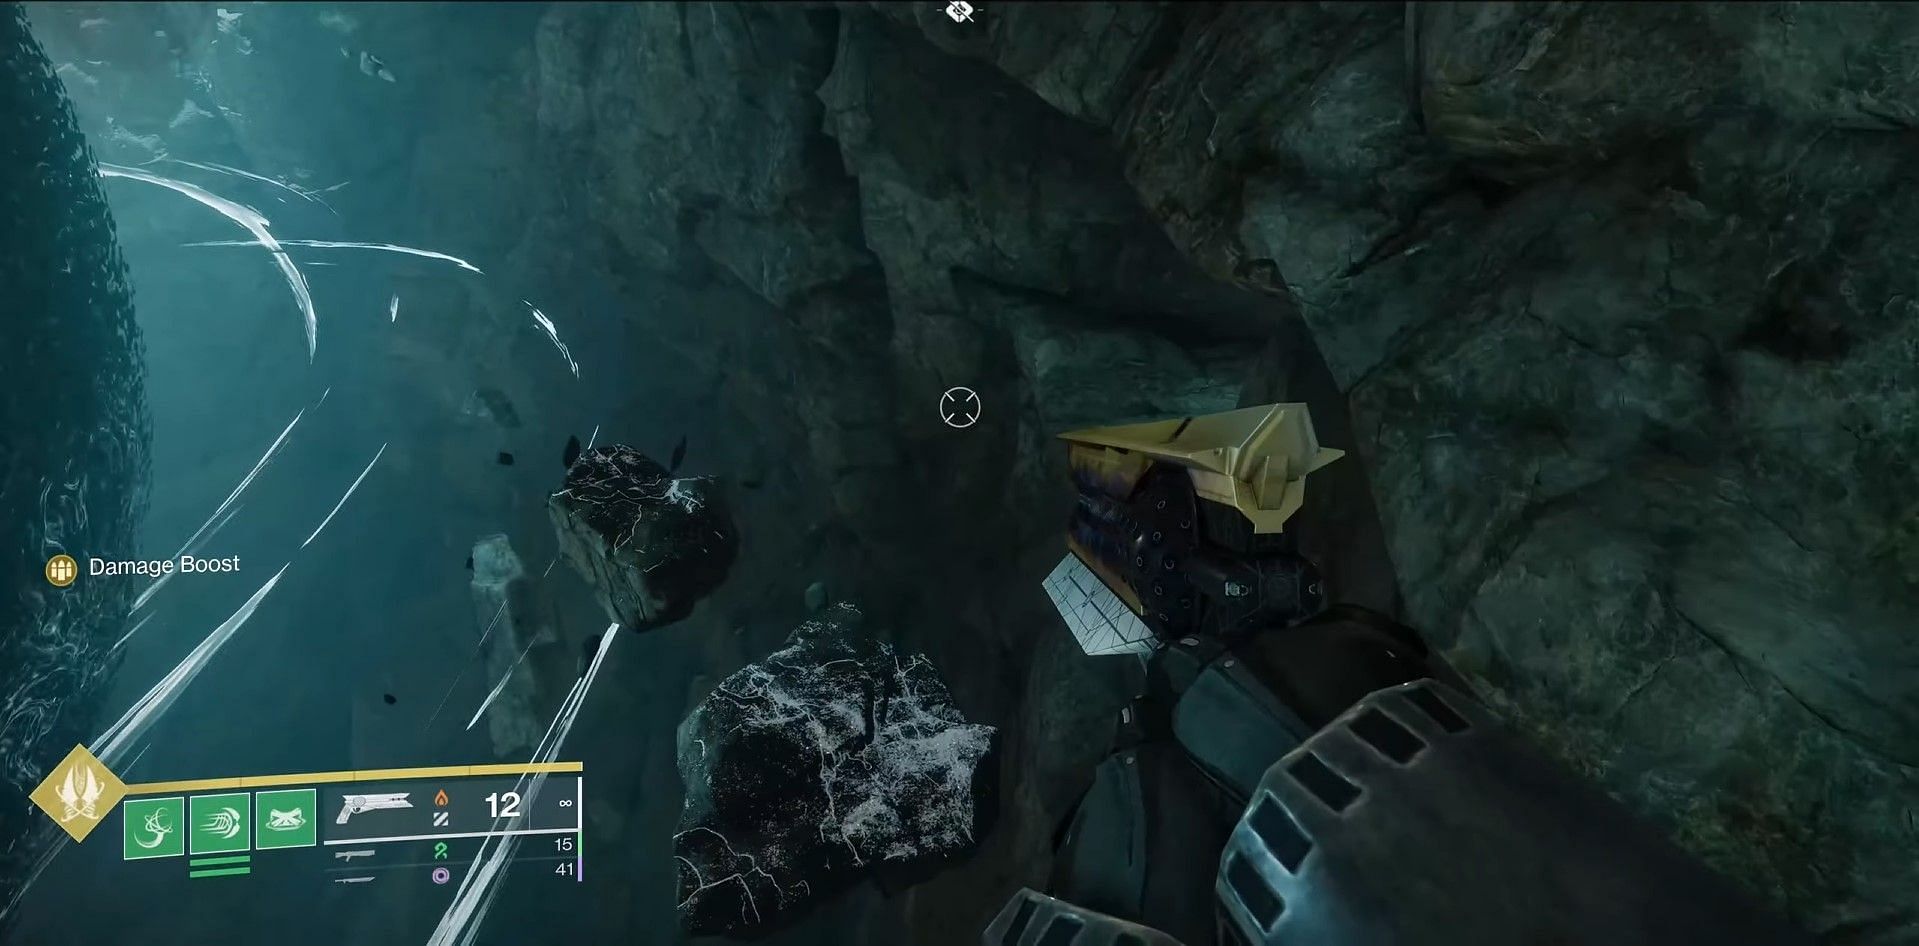 Entrance to the door in Blight room jumping puzzle (Image via Bungie)